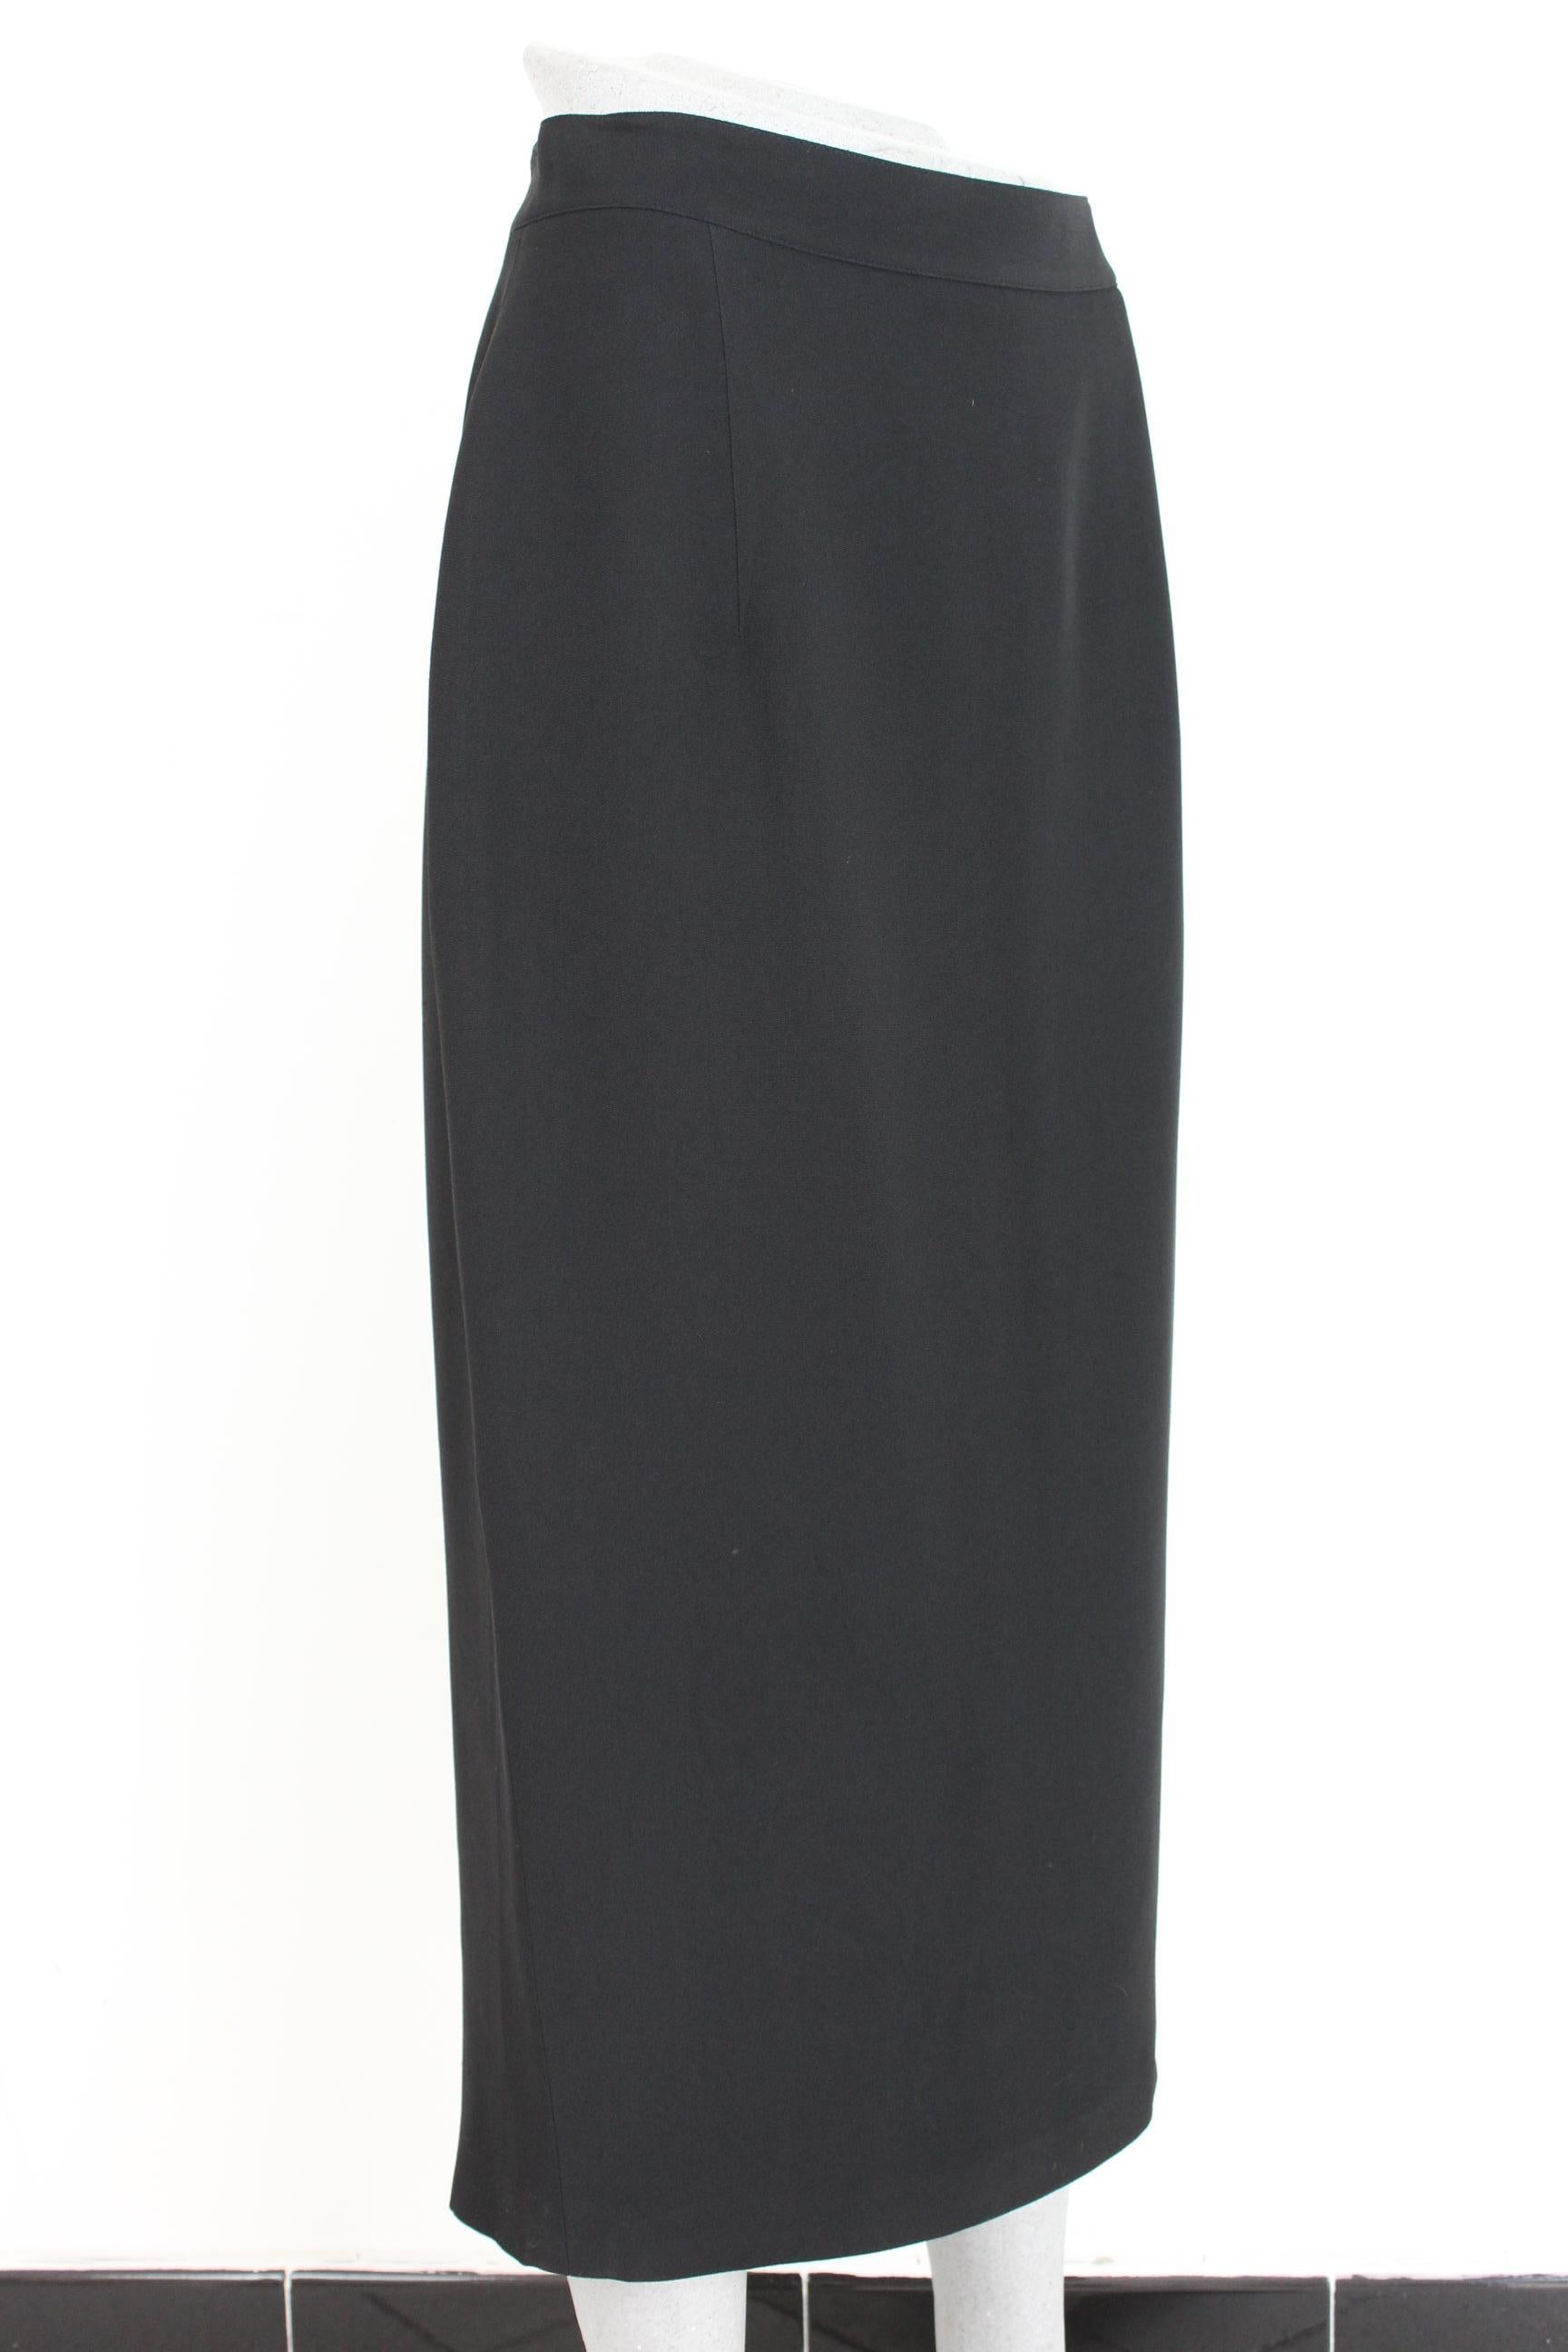 Gattinoni 90's black vintage skirt. Lined with slit. Pencil Skirt. Ideal for an elegant evening look. Made in Italy. Composition 60% acetate, 40% cupro. Excellent vintage condition.

Size: 48 It 14 Us 16 Uk

Waist: 39 cm 
Length: 85 cm